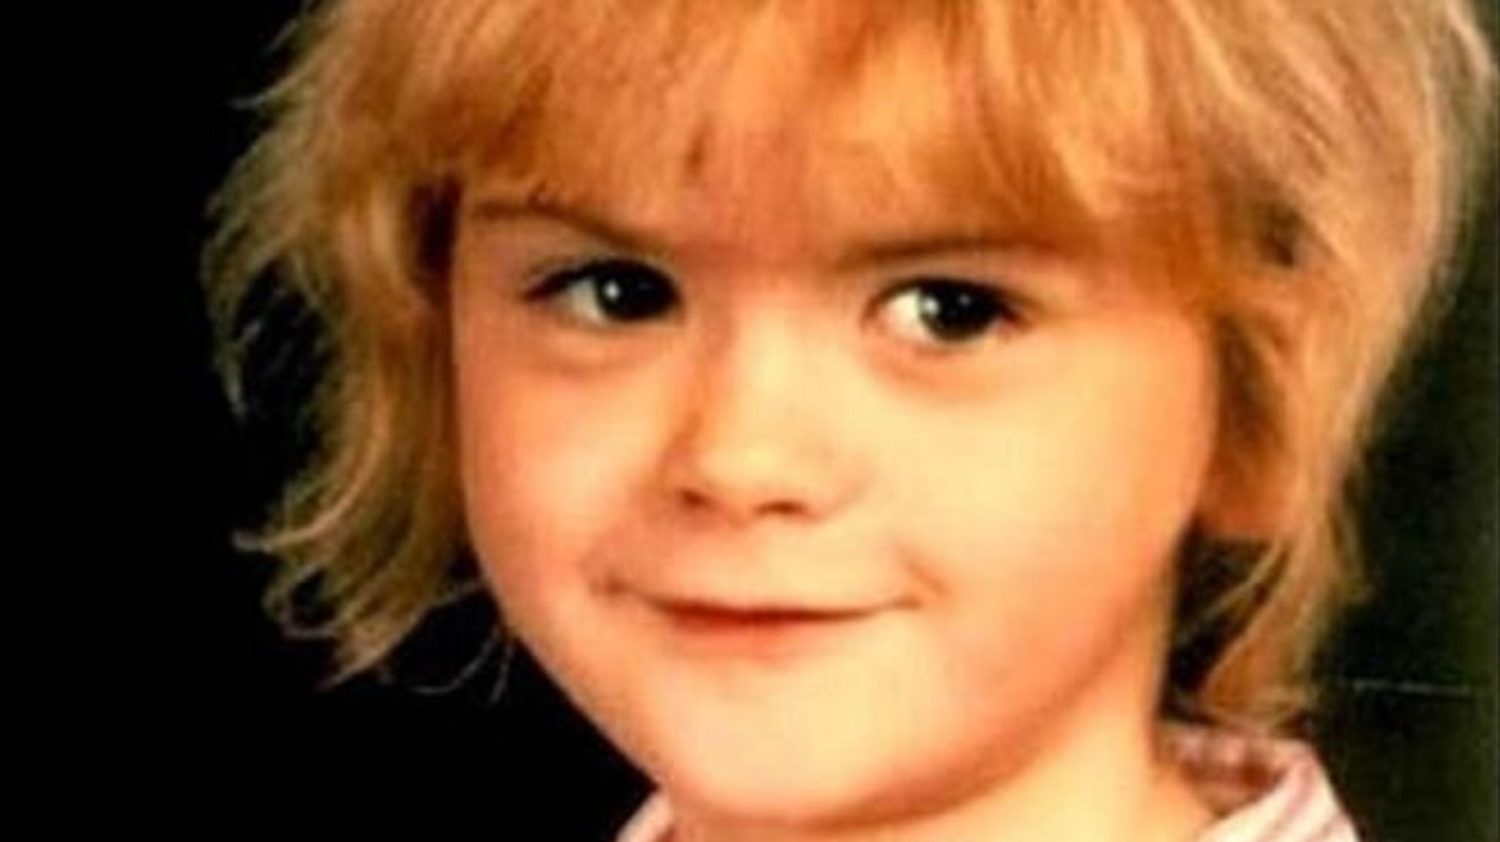 The Horrid Murder Of 8-year-old April Tinsley And The 30-year Search For Her Torturer